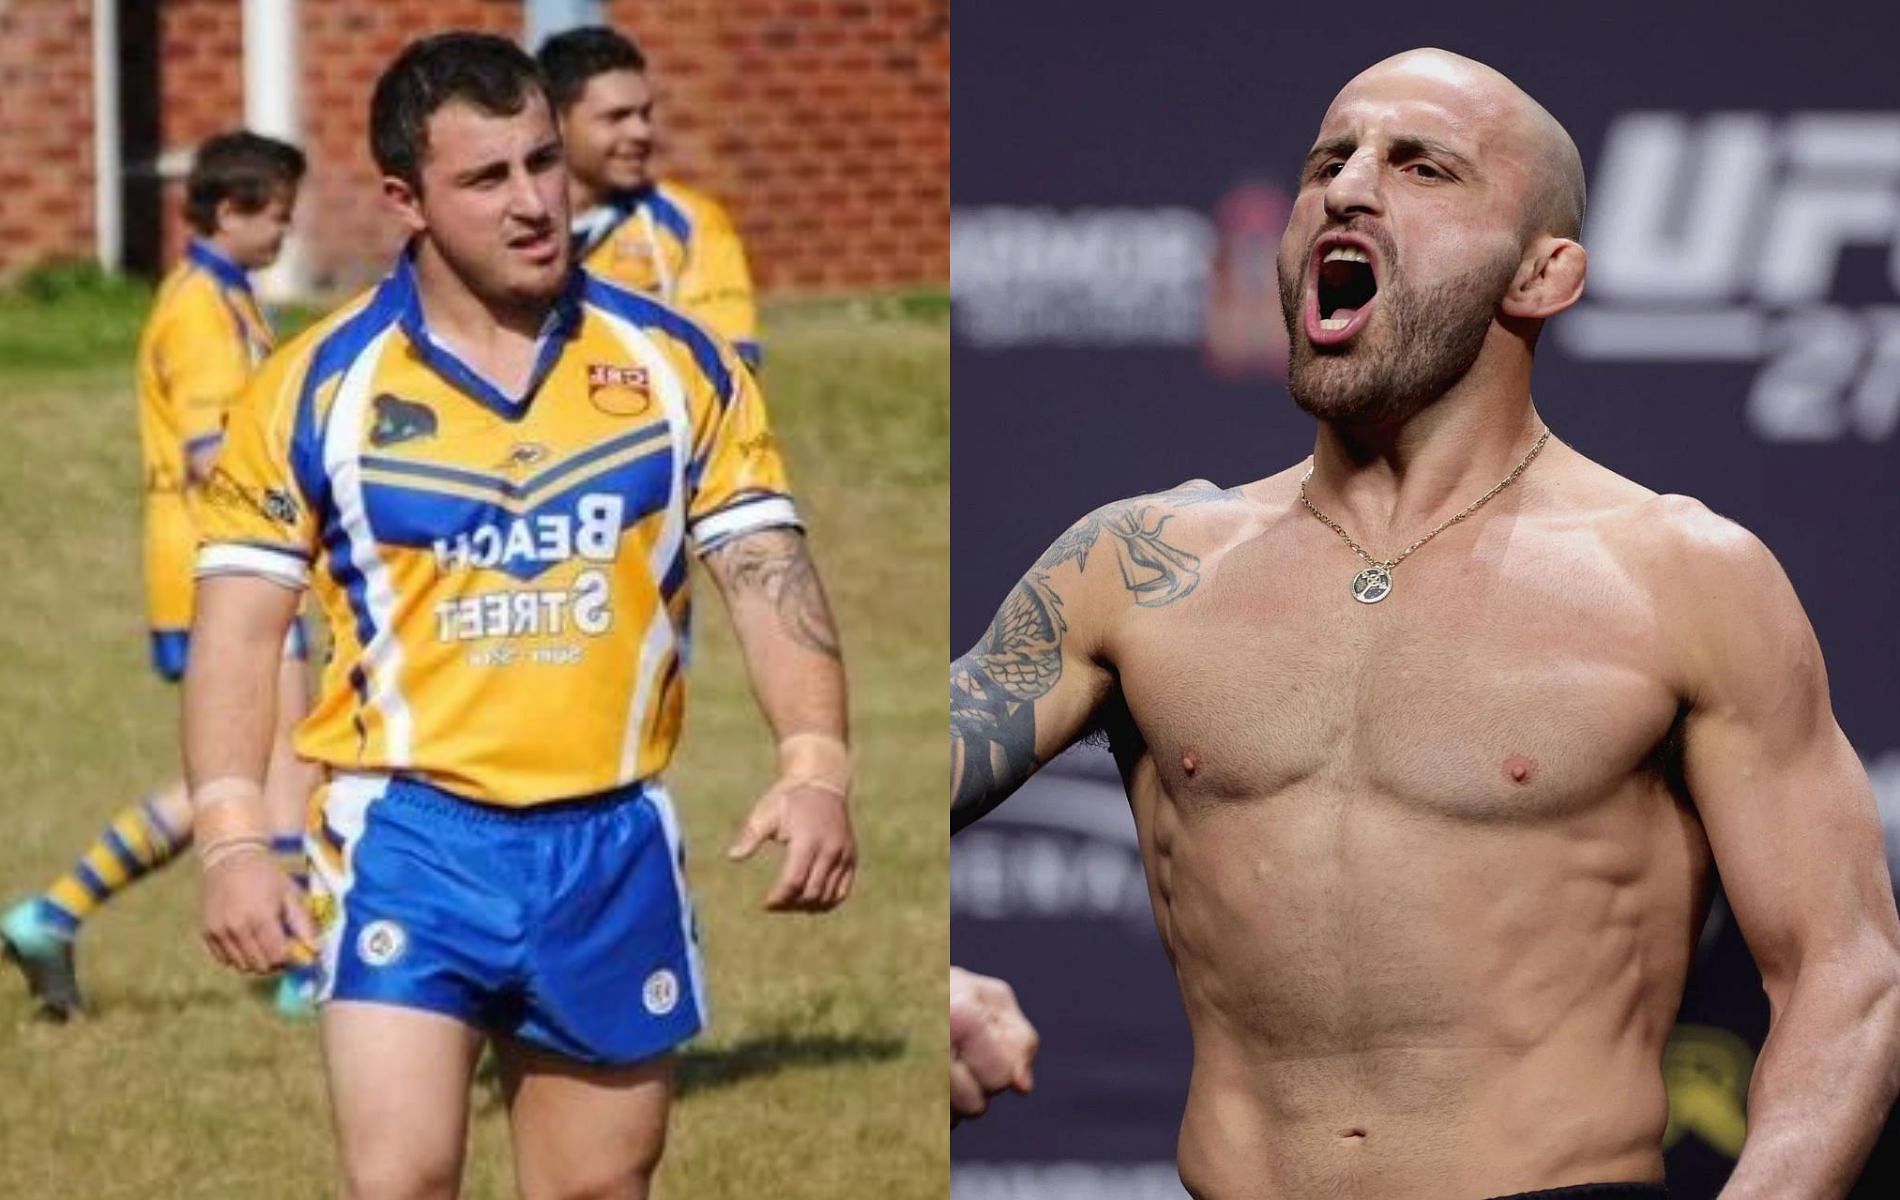 Alexander Volkanovski during his rugby days (left) and at a UFC weigh-in (right) [Image Credits- @mma_kings on Twitter]